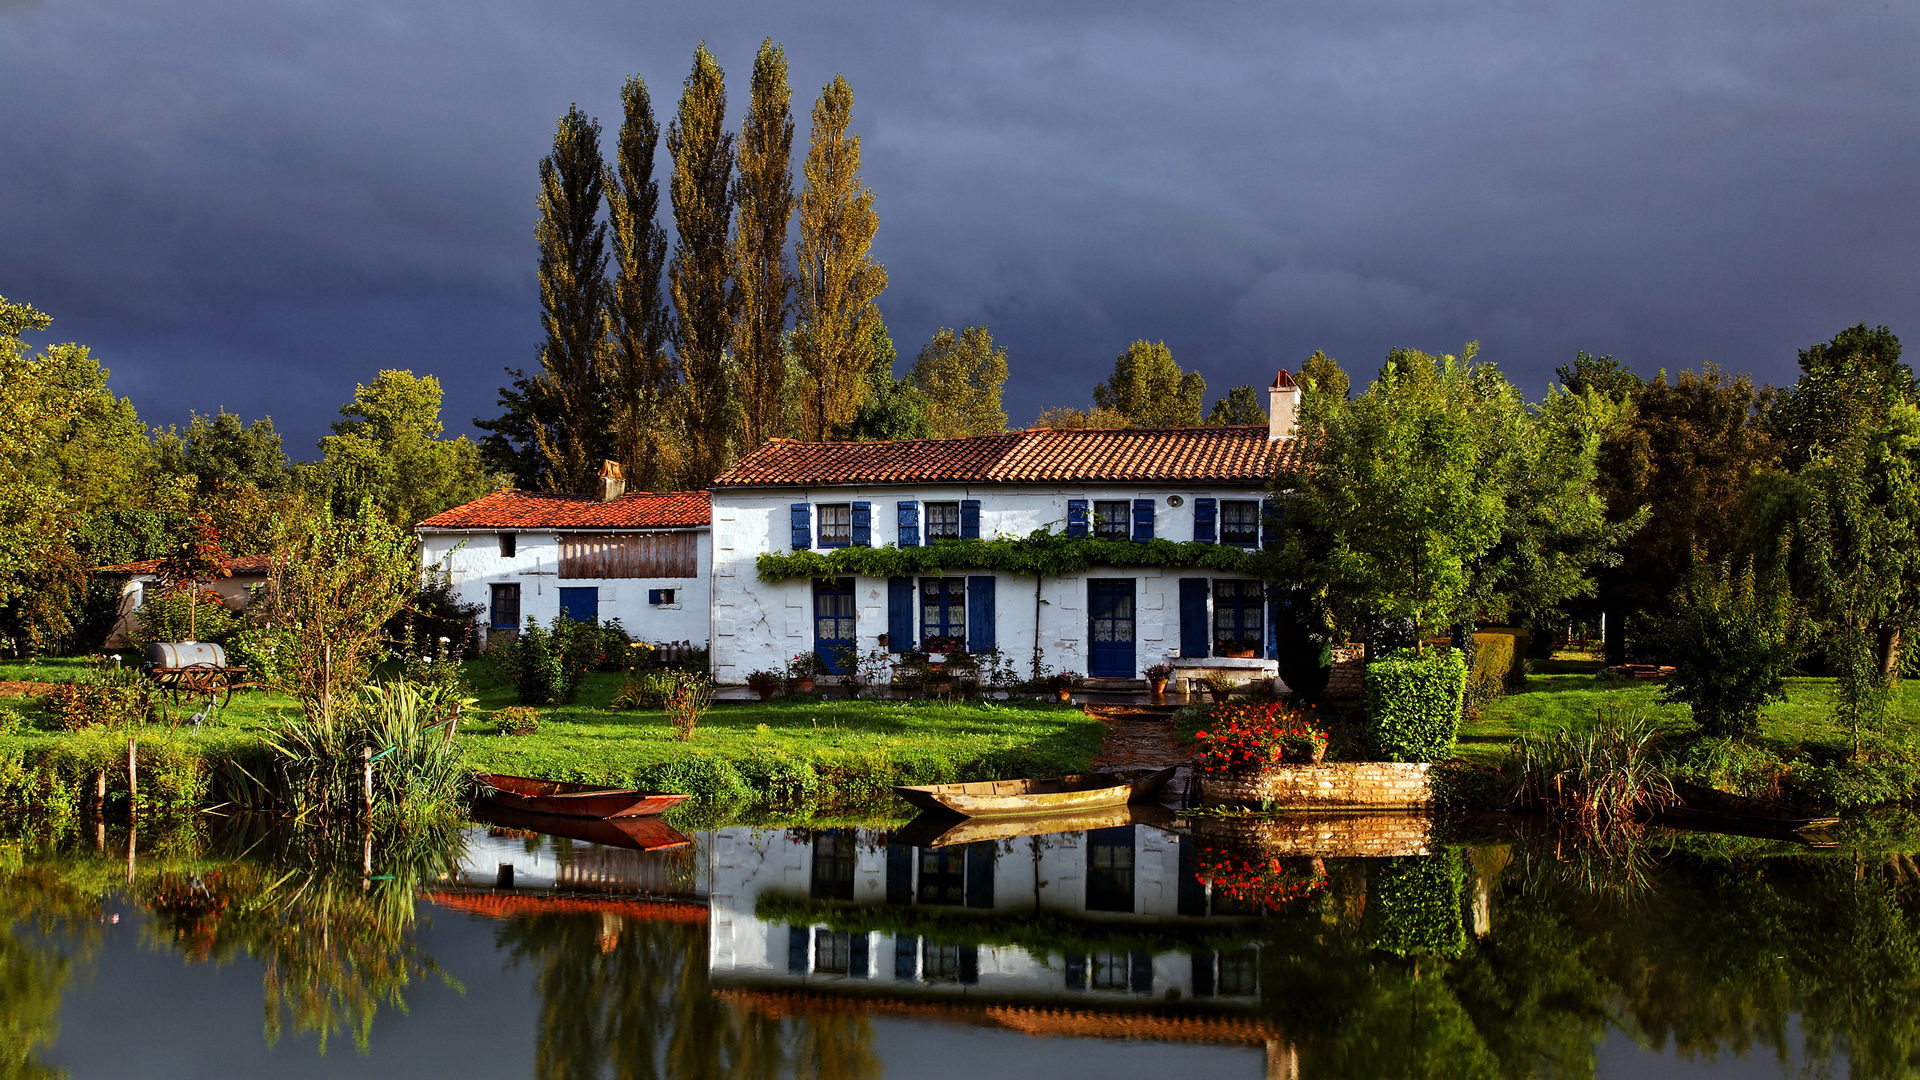 bush, grass, old, man made, house, boat, building, garden, lake, landscape, mansion, photography, reflection, sky, tree, water